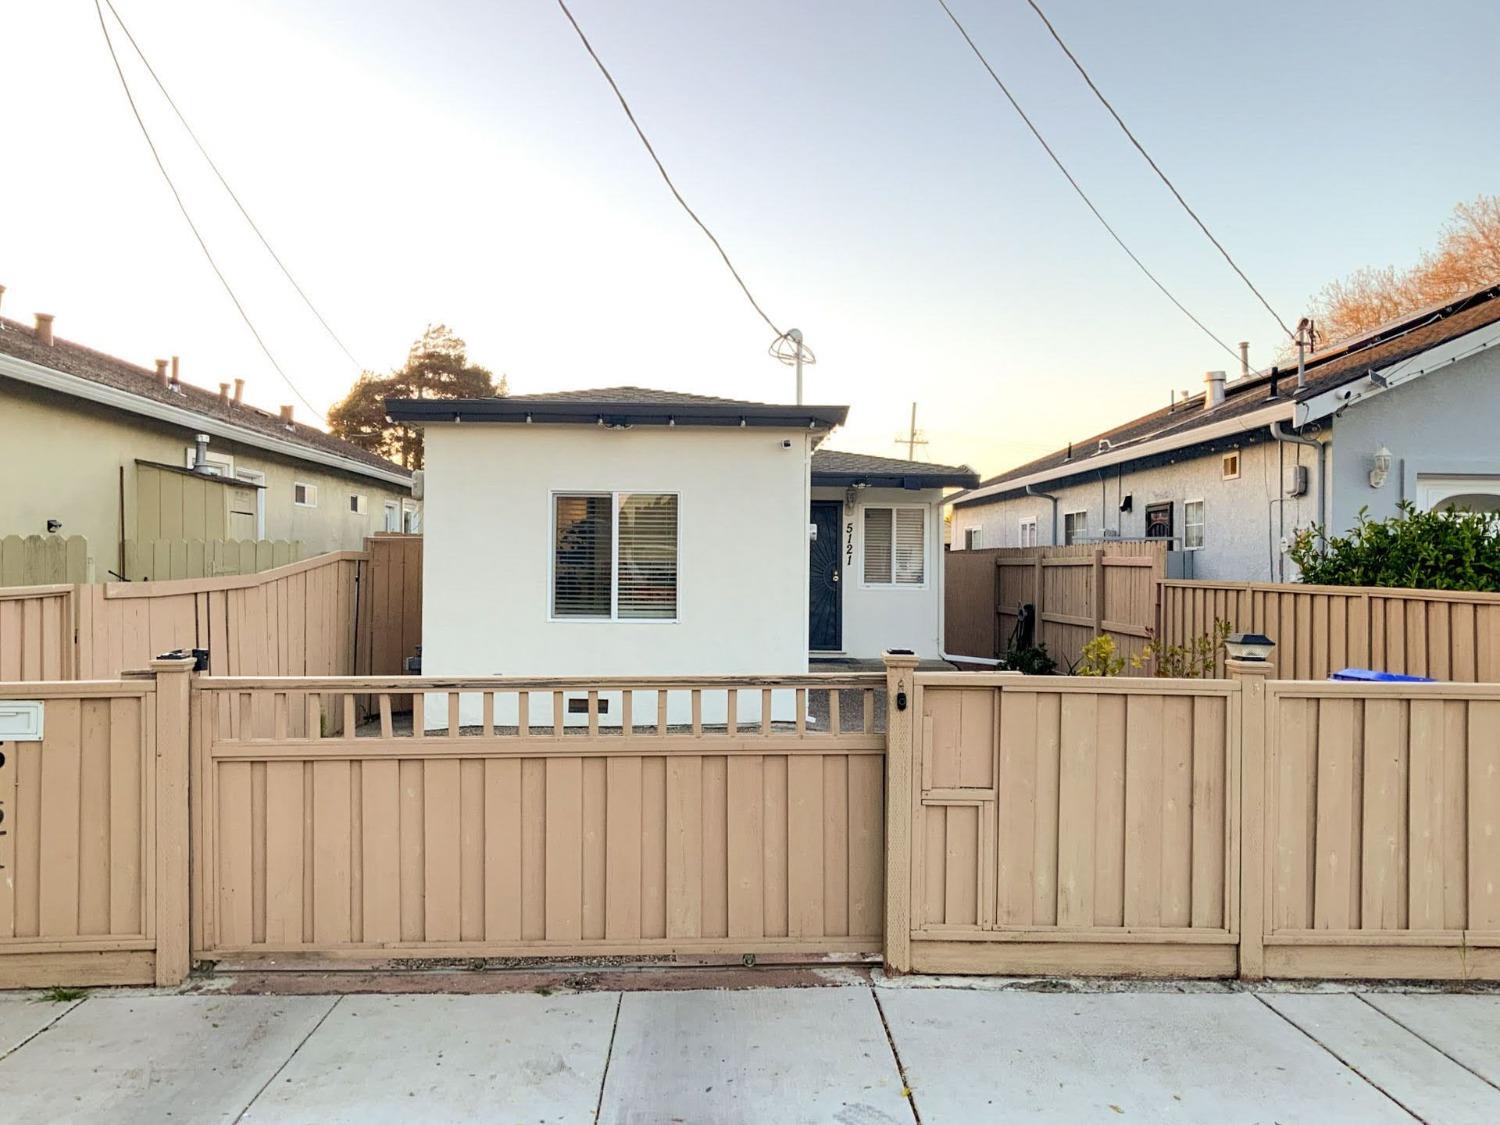 Photo of 5121 Burlingame Ave in Richmond, CA